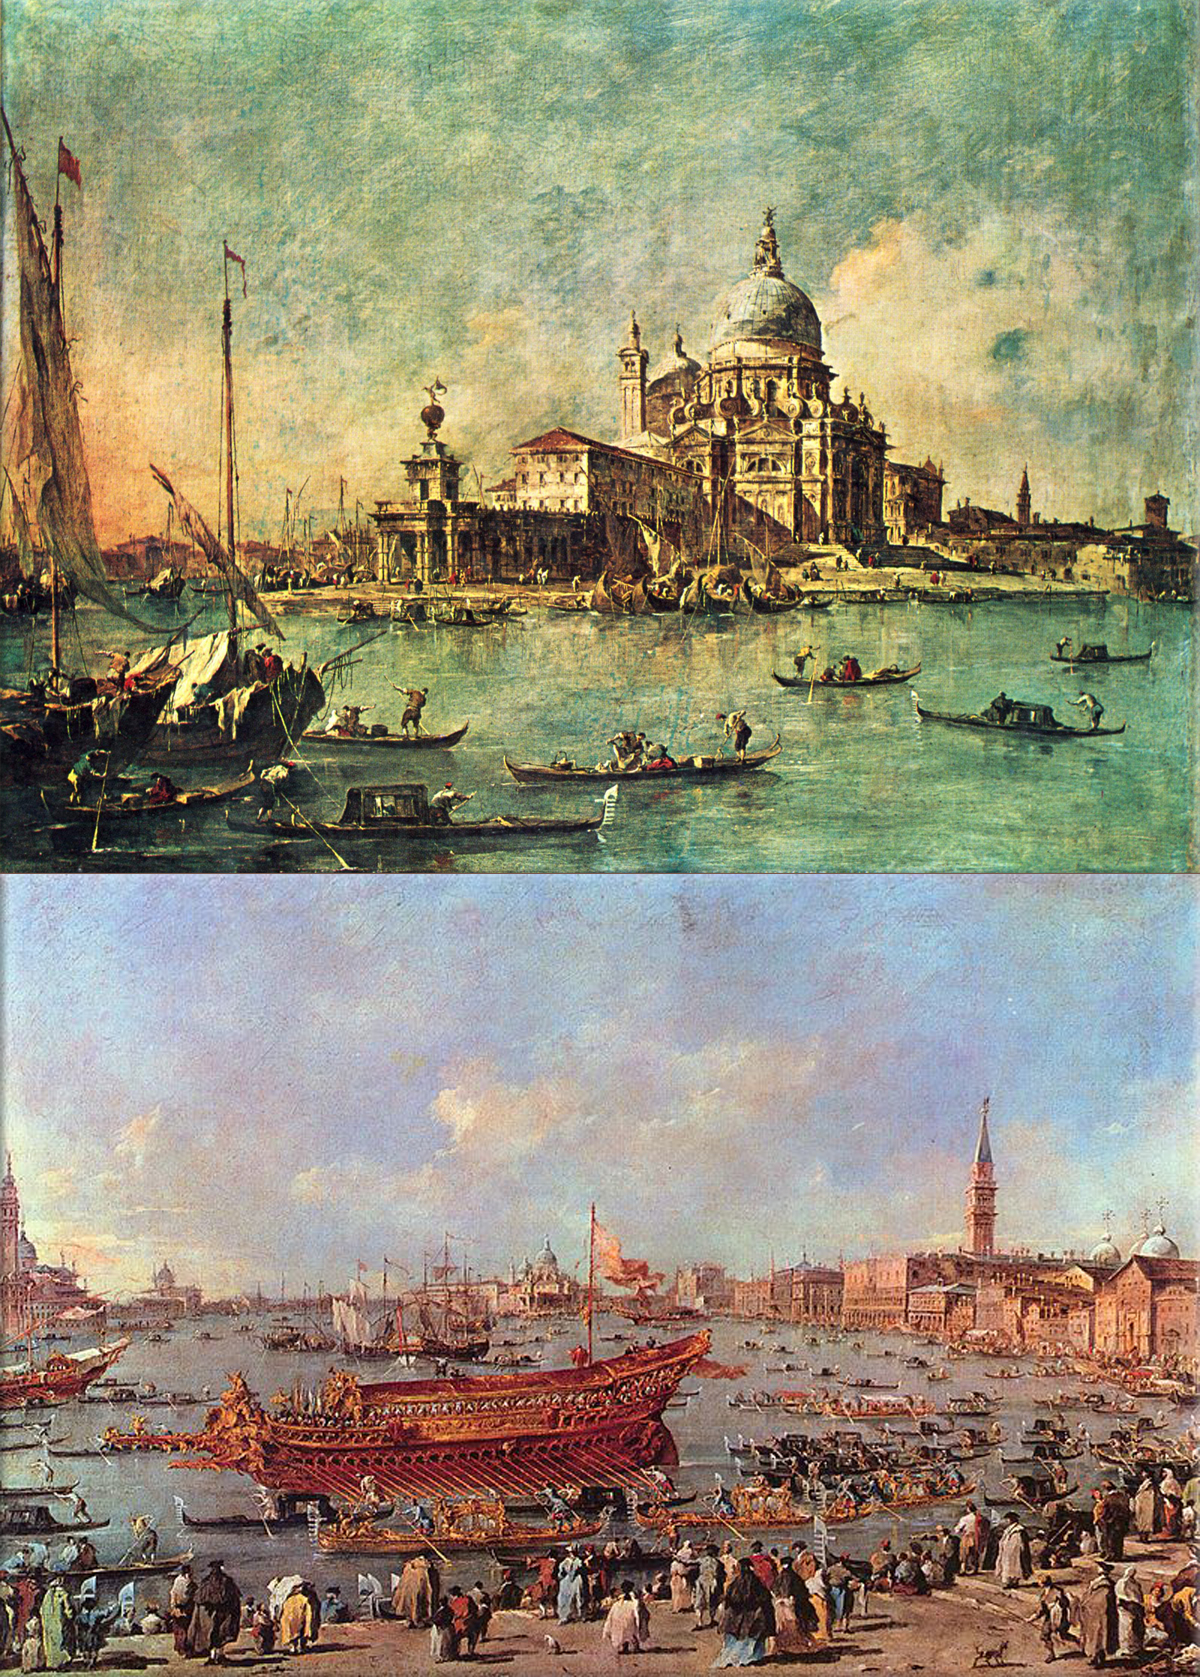 The Visconti of Milan's fleet is destroyed by the Venetians on the Po River